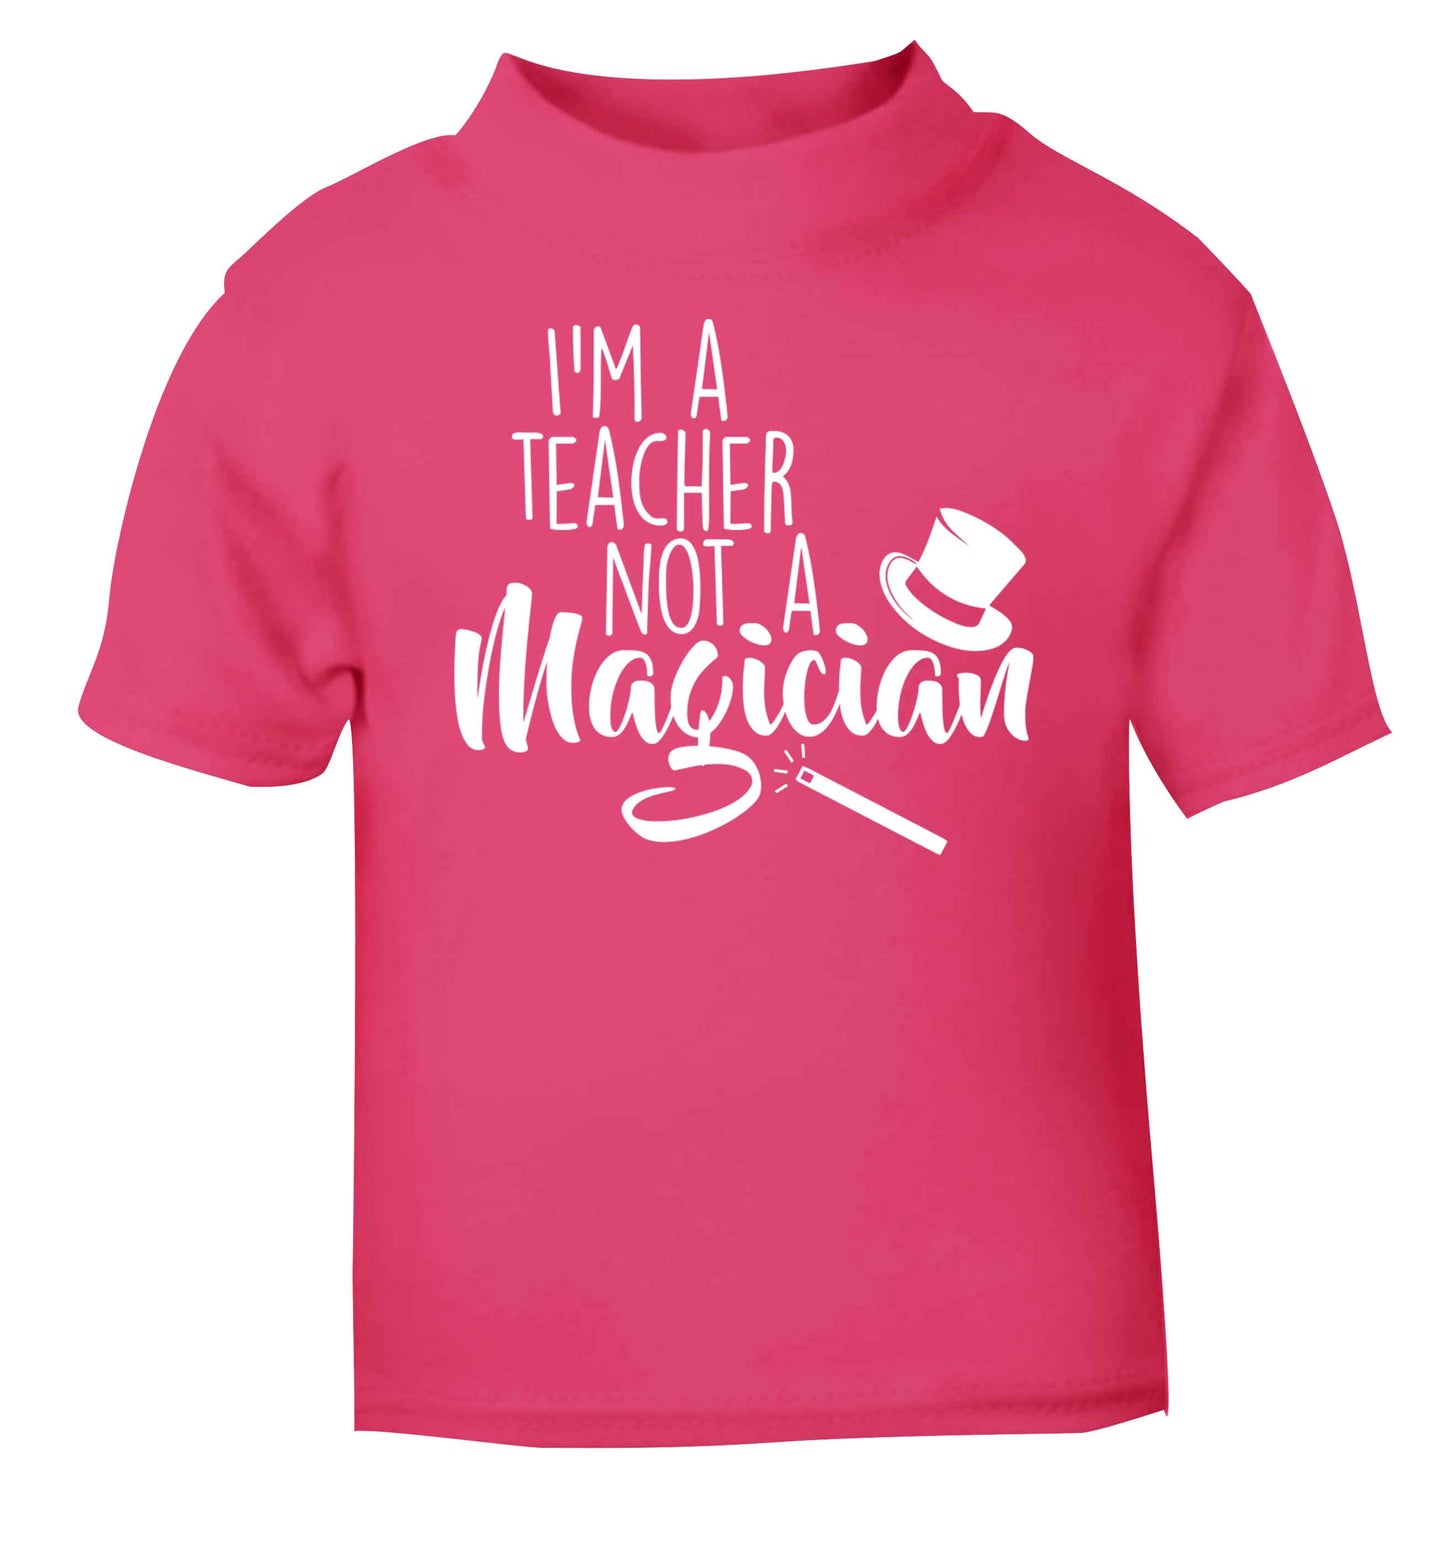 I'm a teacher not a magician pink baby toddler Tshirt 2 Years